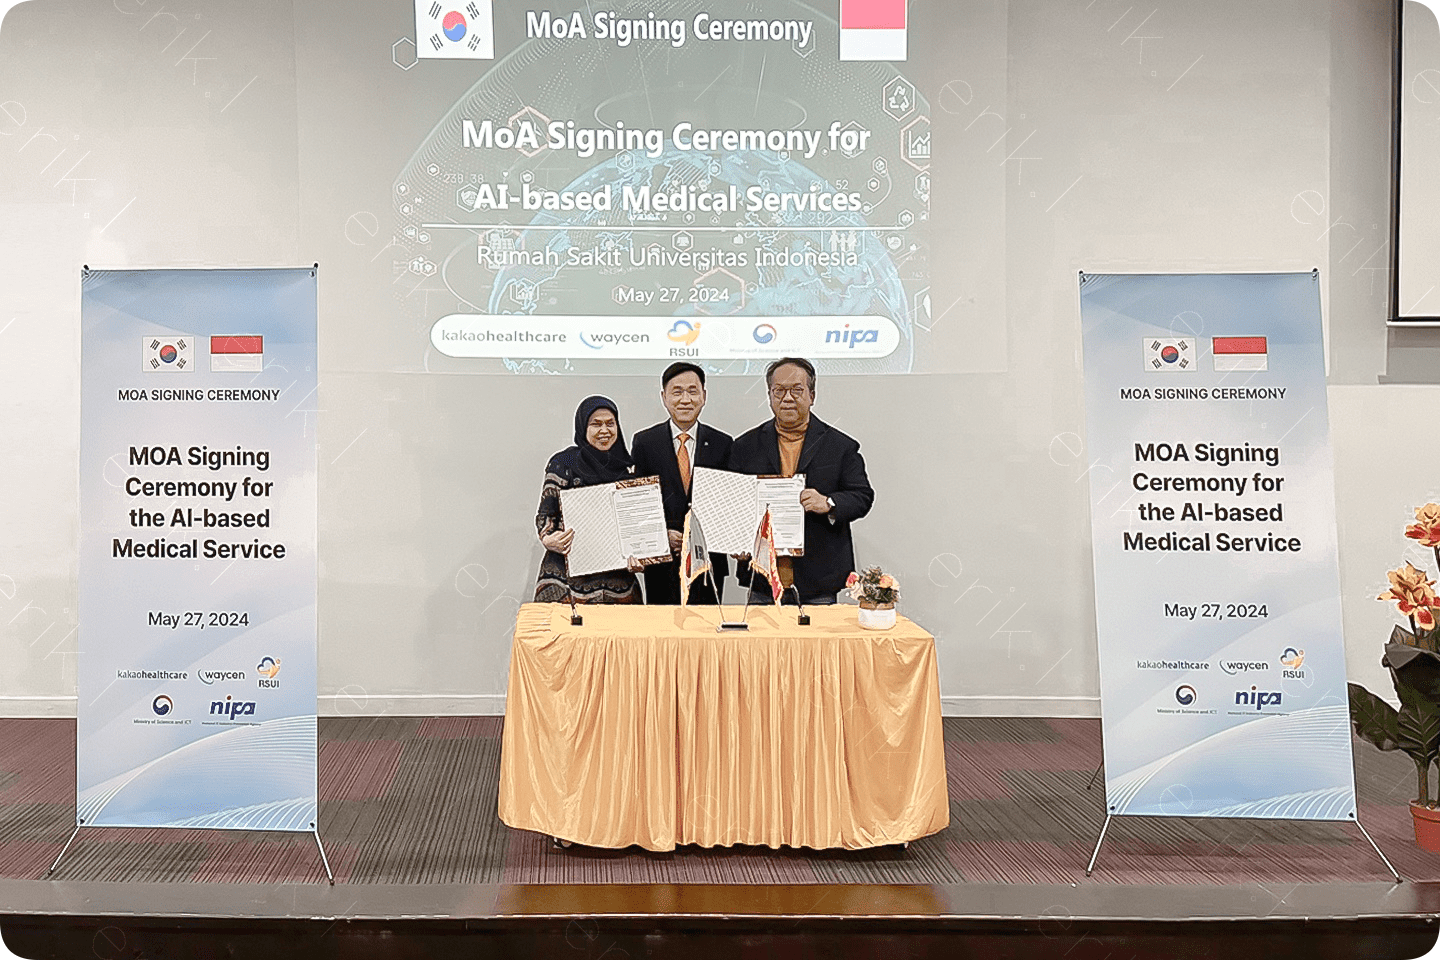 KakaoHealthcare to offer AI-based glucose management solution in Indonesia